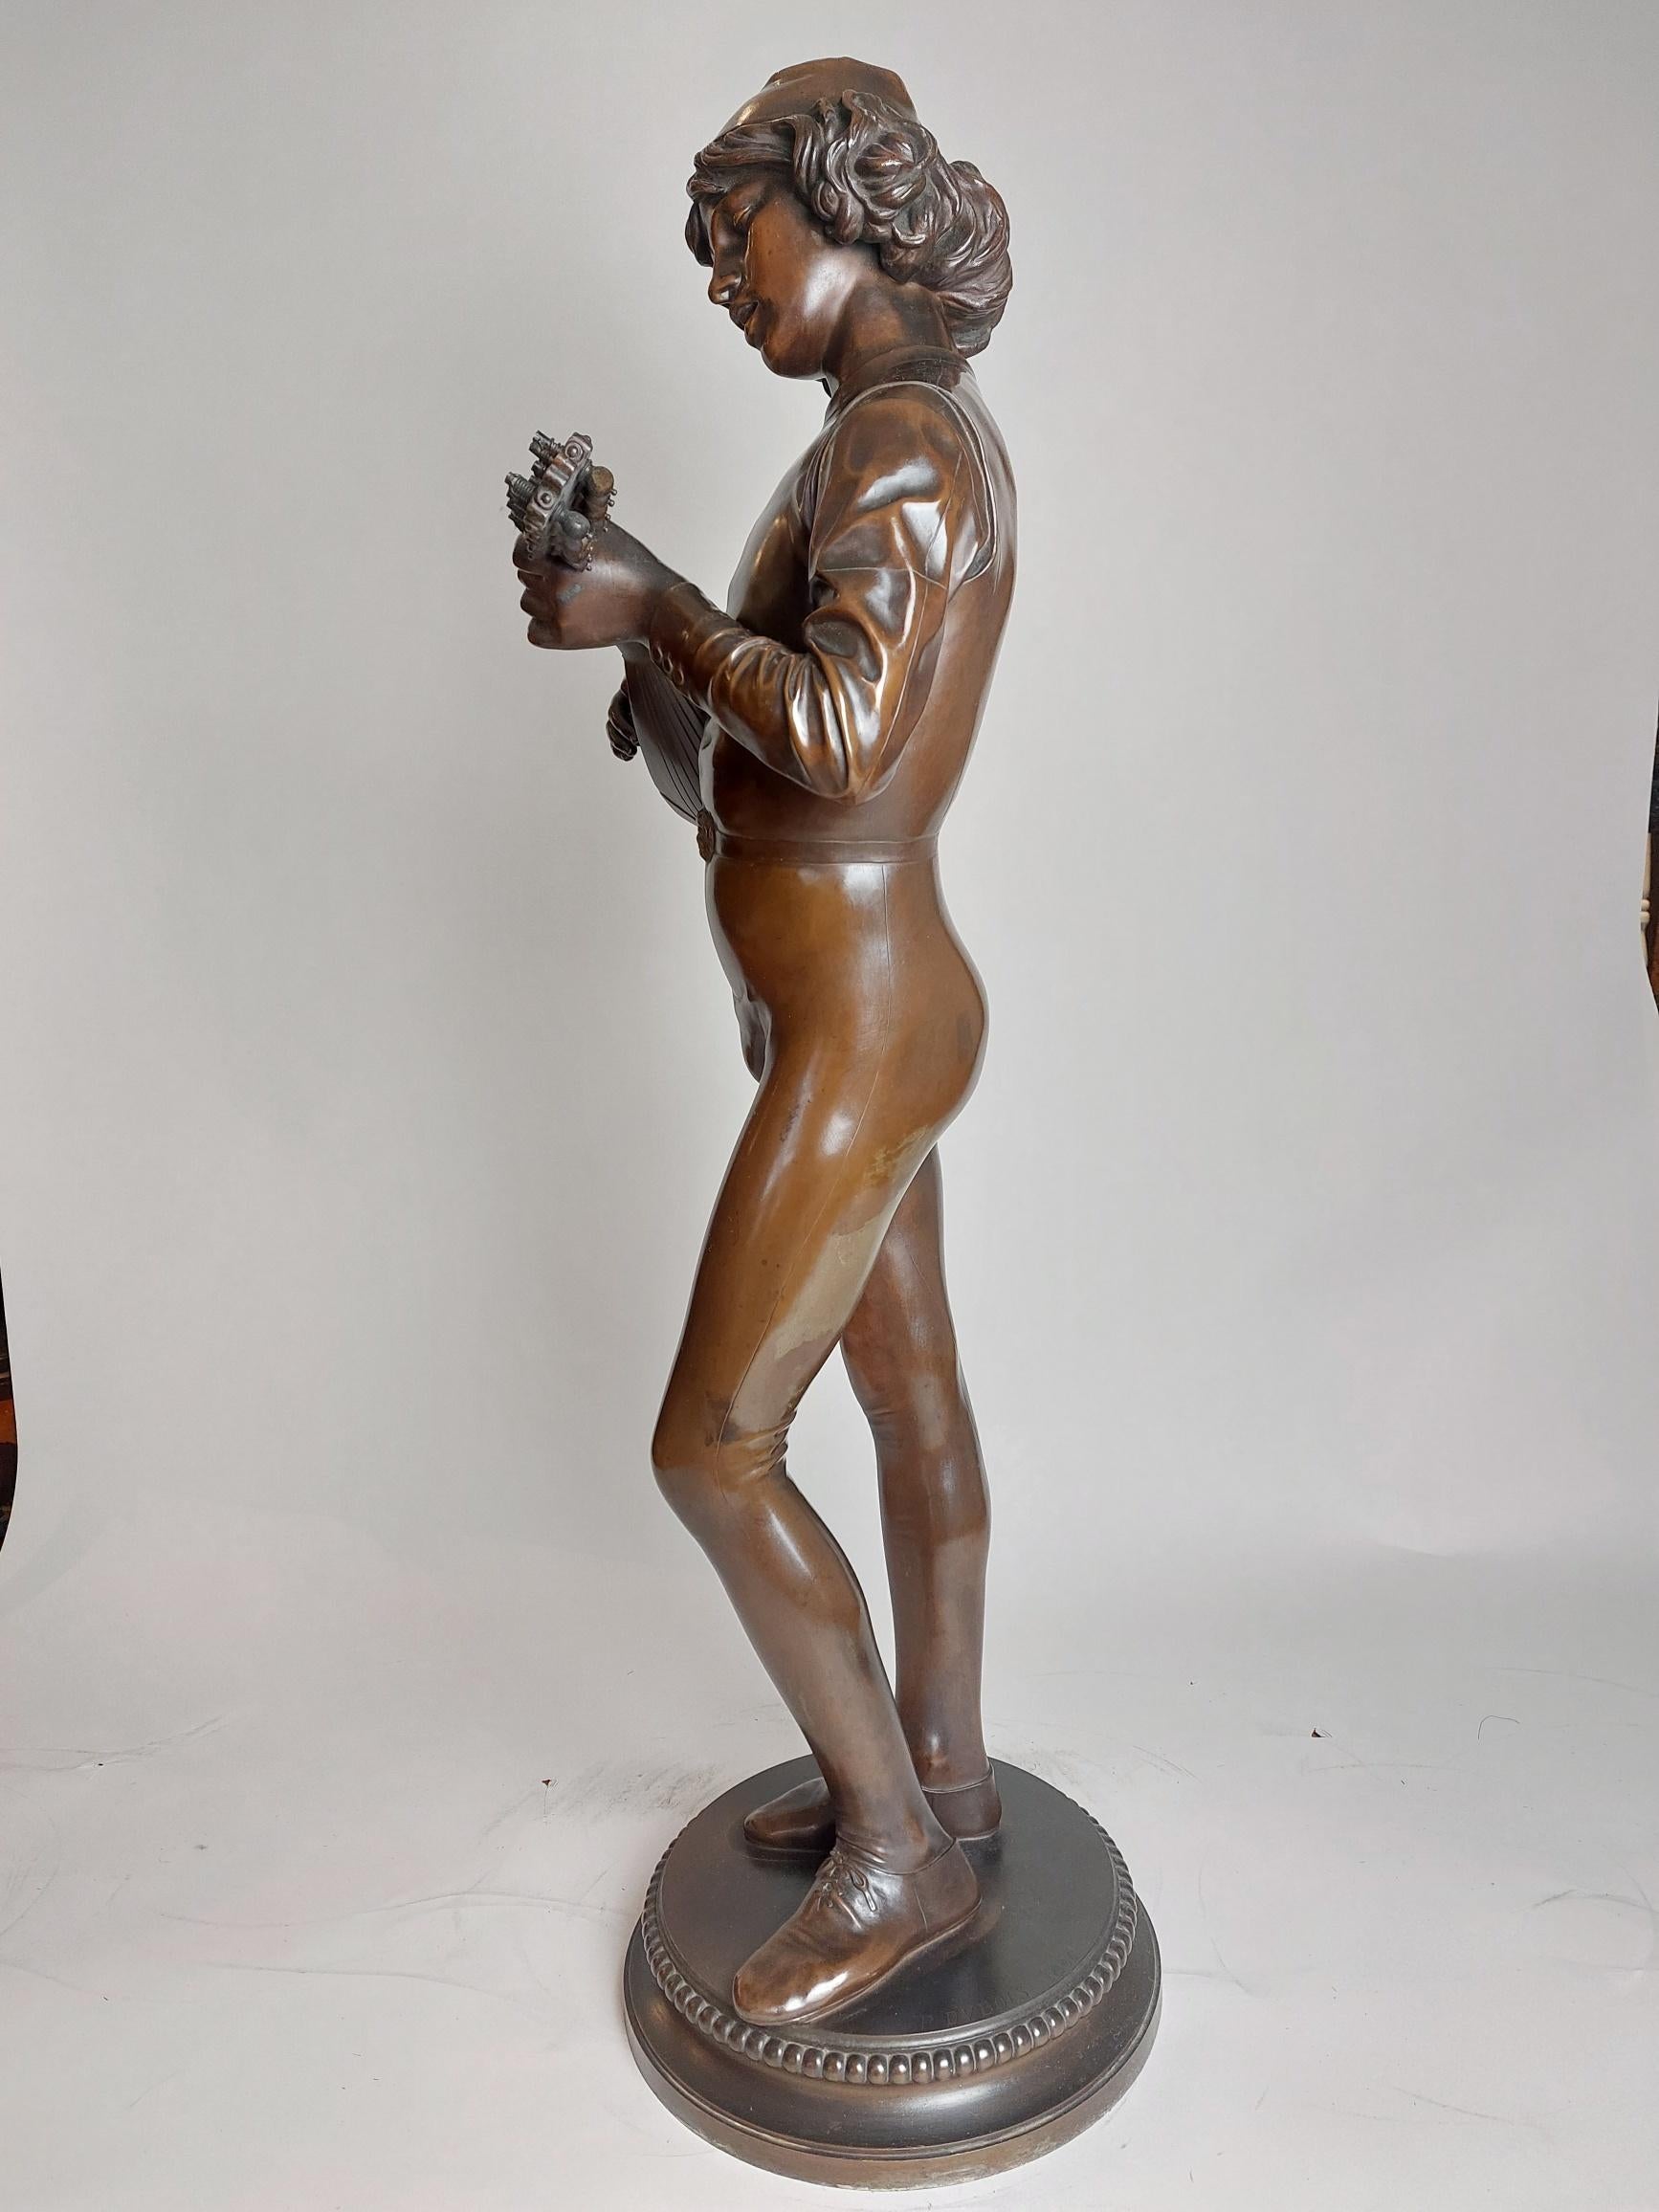 Chanteur florentin du XVe siècle
A classical 19th century French bronze of a young troubadour playing a lute.
The musician seems transported by the song he is playing, carefully watching his hand as he sings. Troubadours were a class of knightly